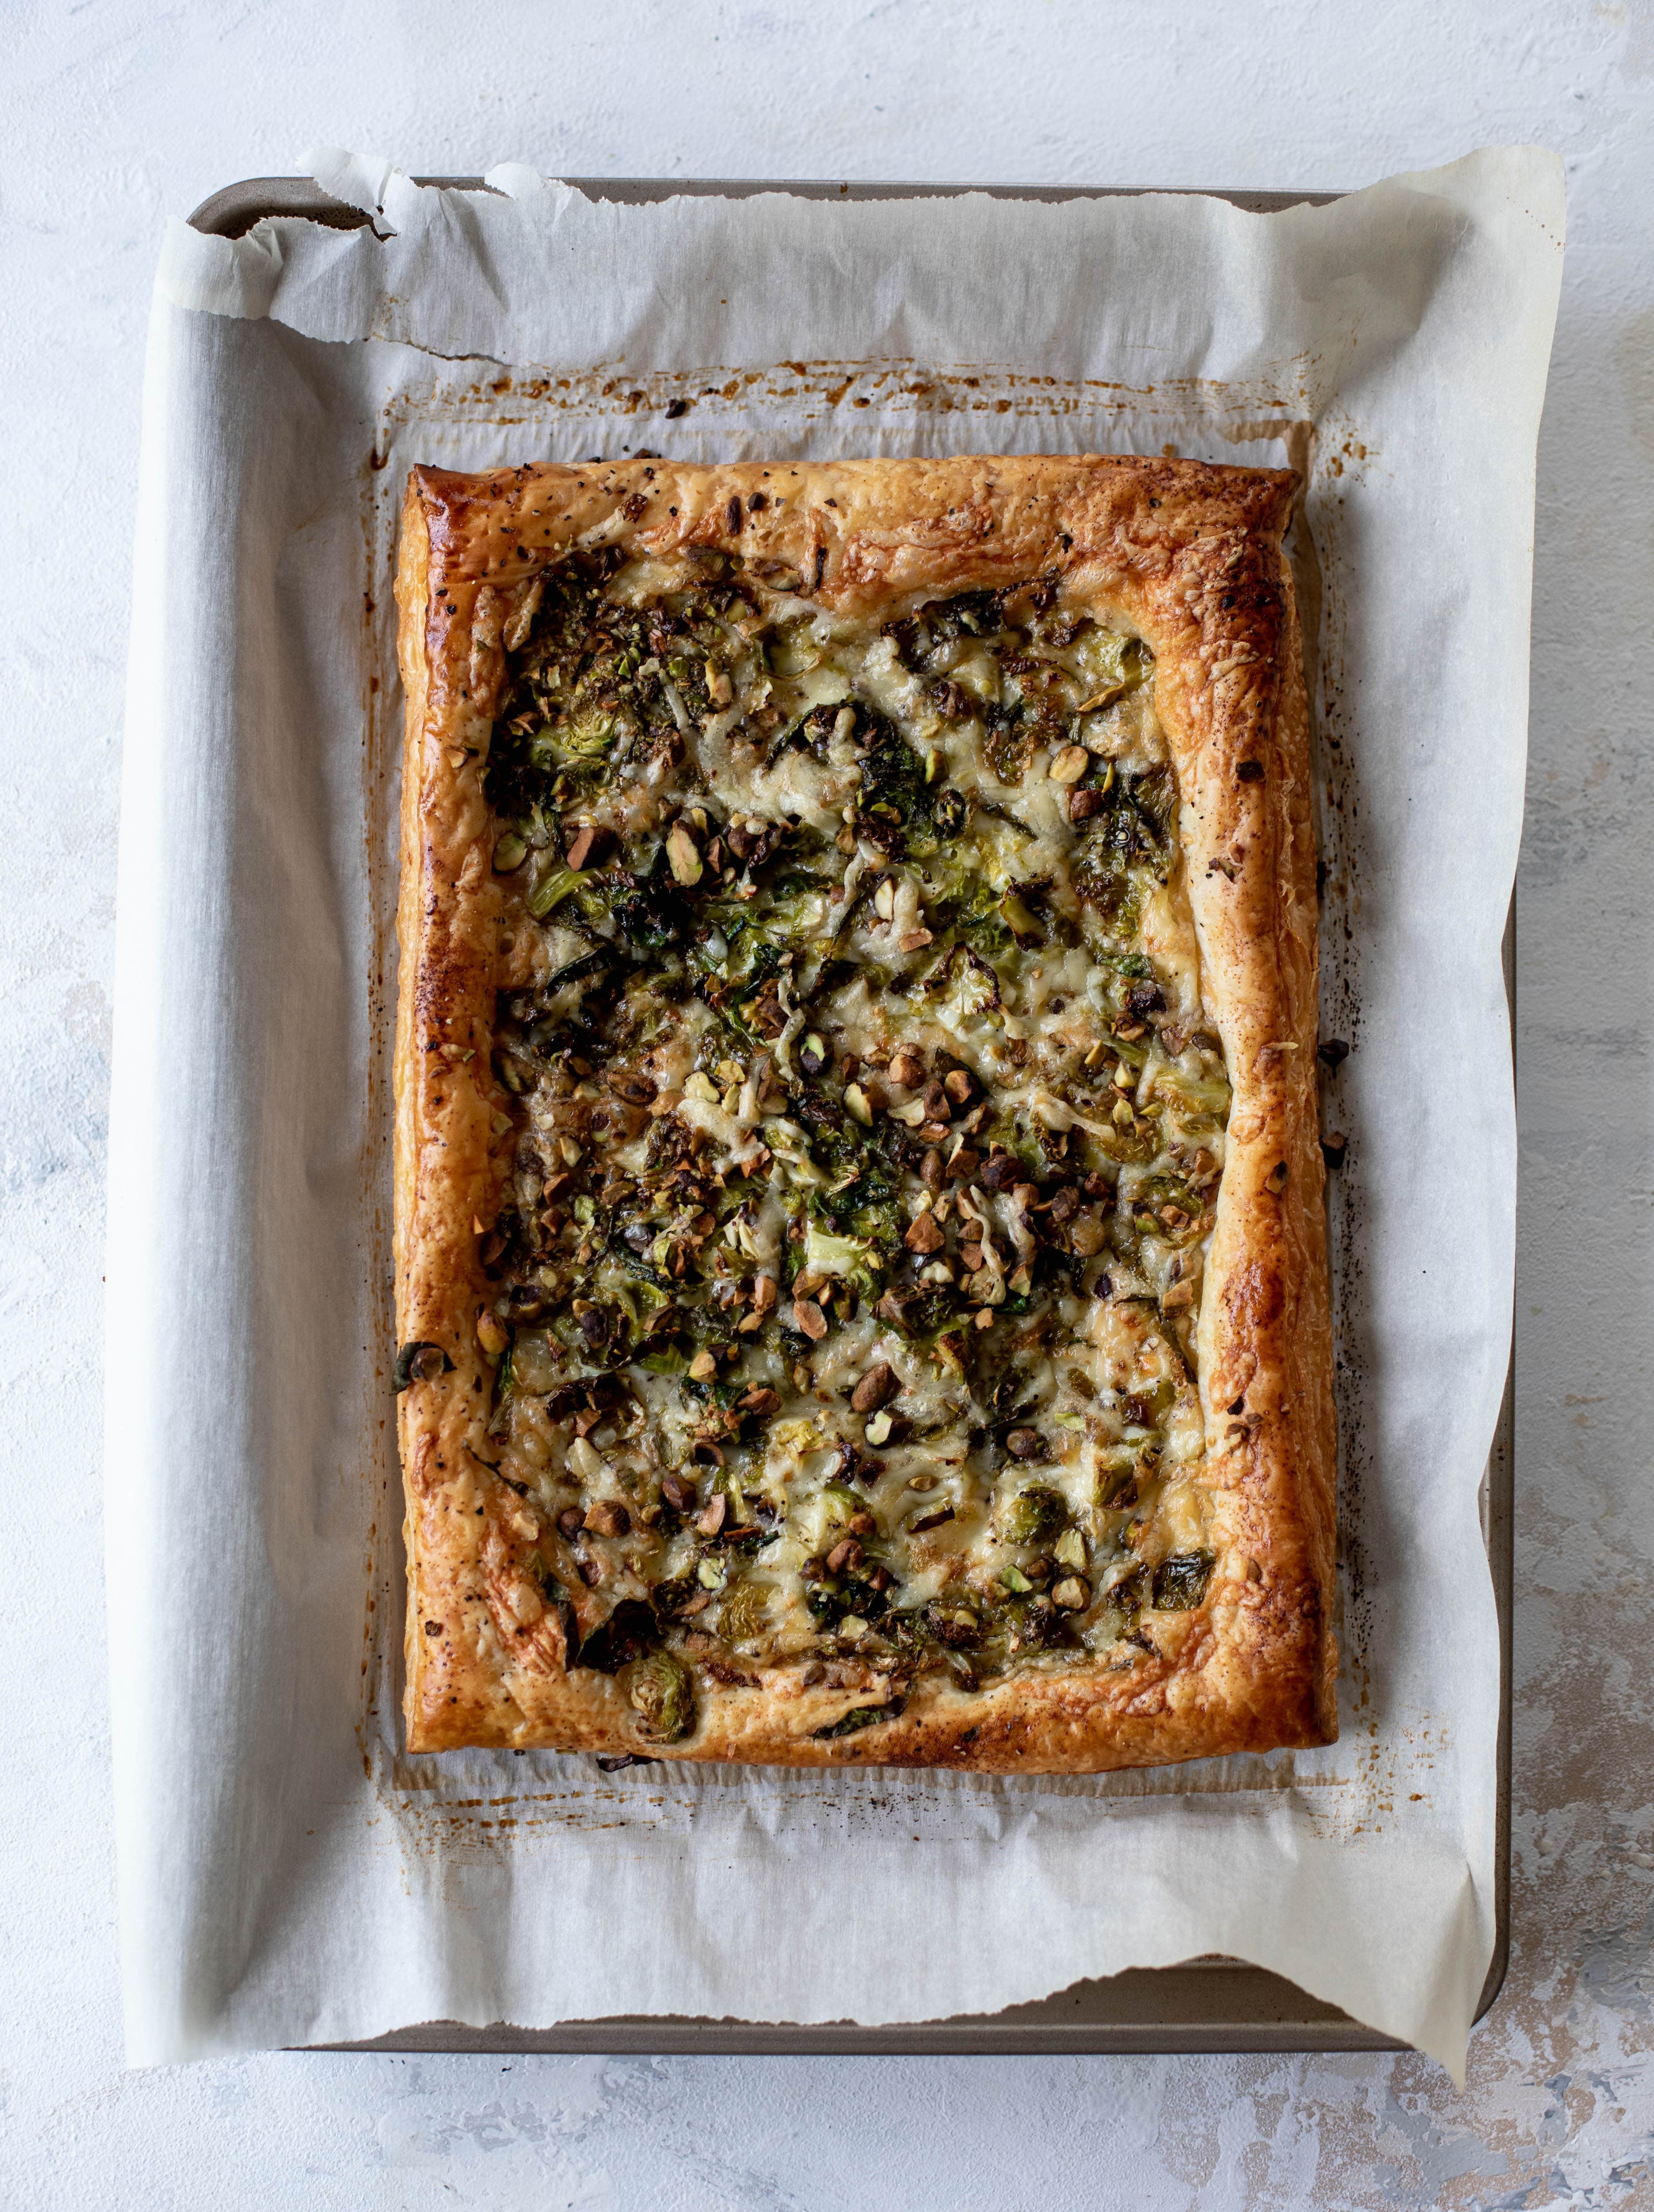 This brussels sprouts tart has a ton of flavor! Melty fontina, sliced brussels and crunchy pistachios all on top of puff pastry. Delish!